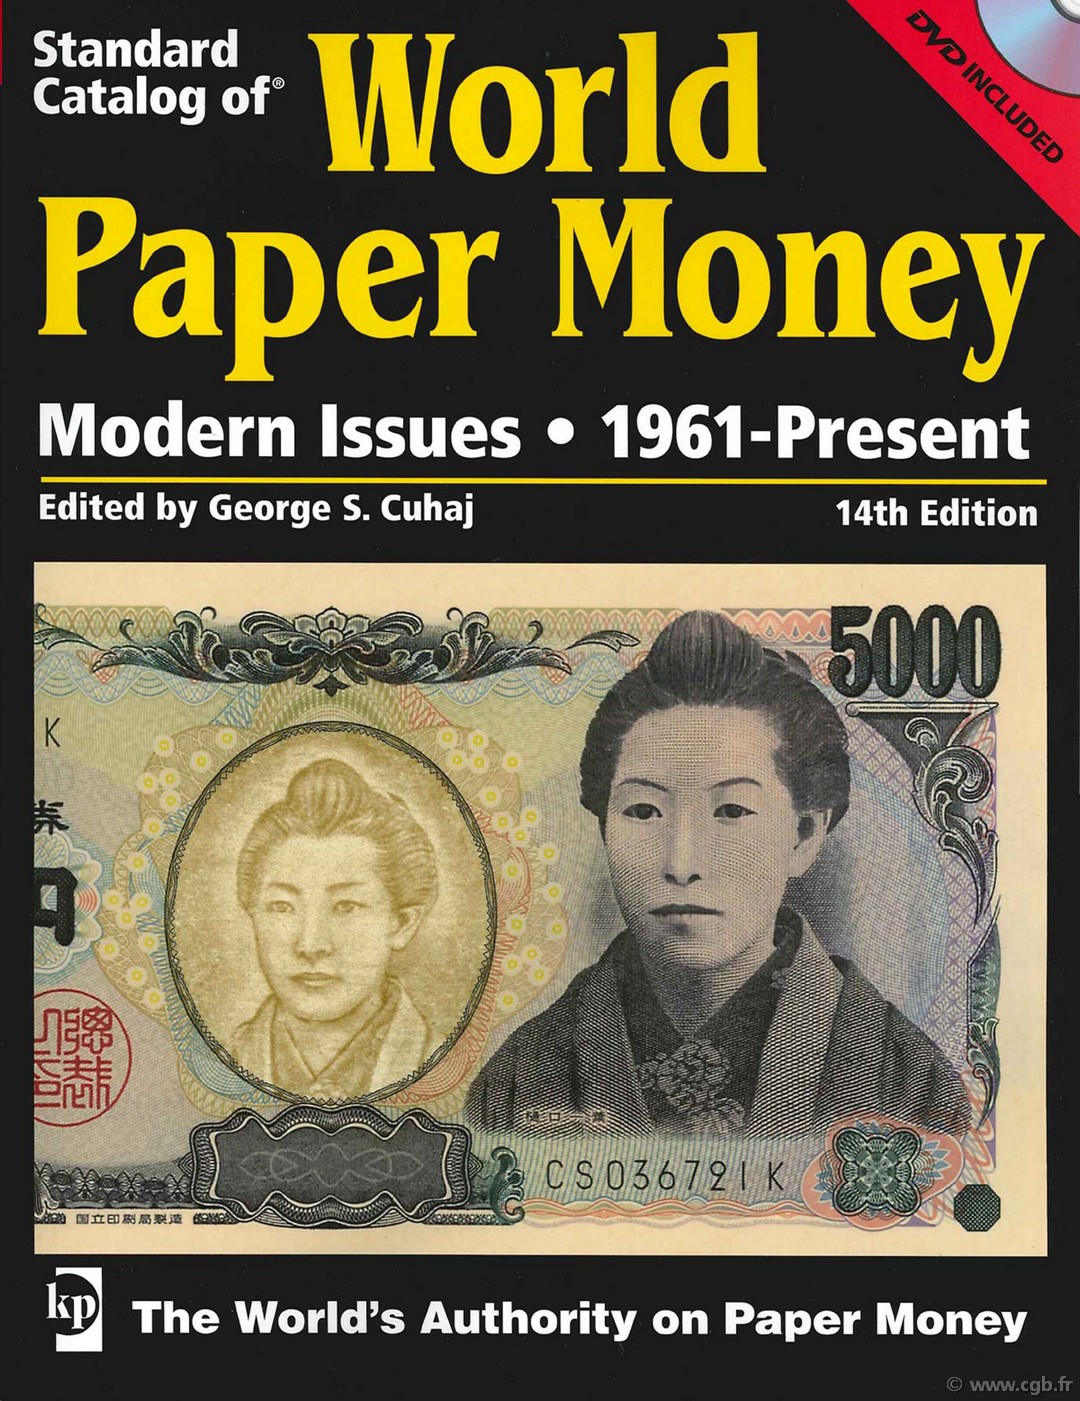 World paper money, modern issues (1961-Present) - 14th edition CUHAJ George S.